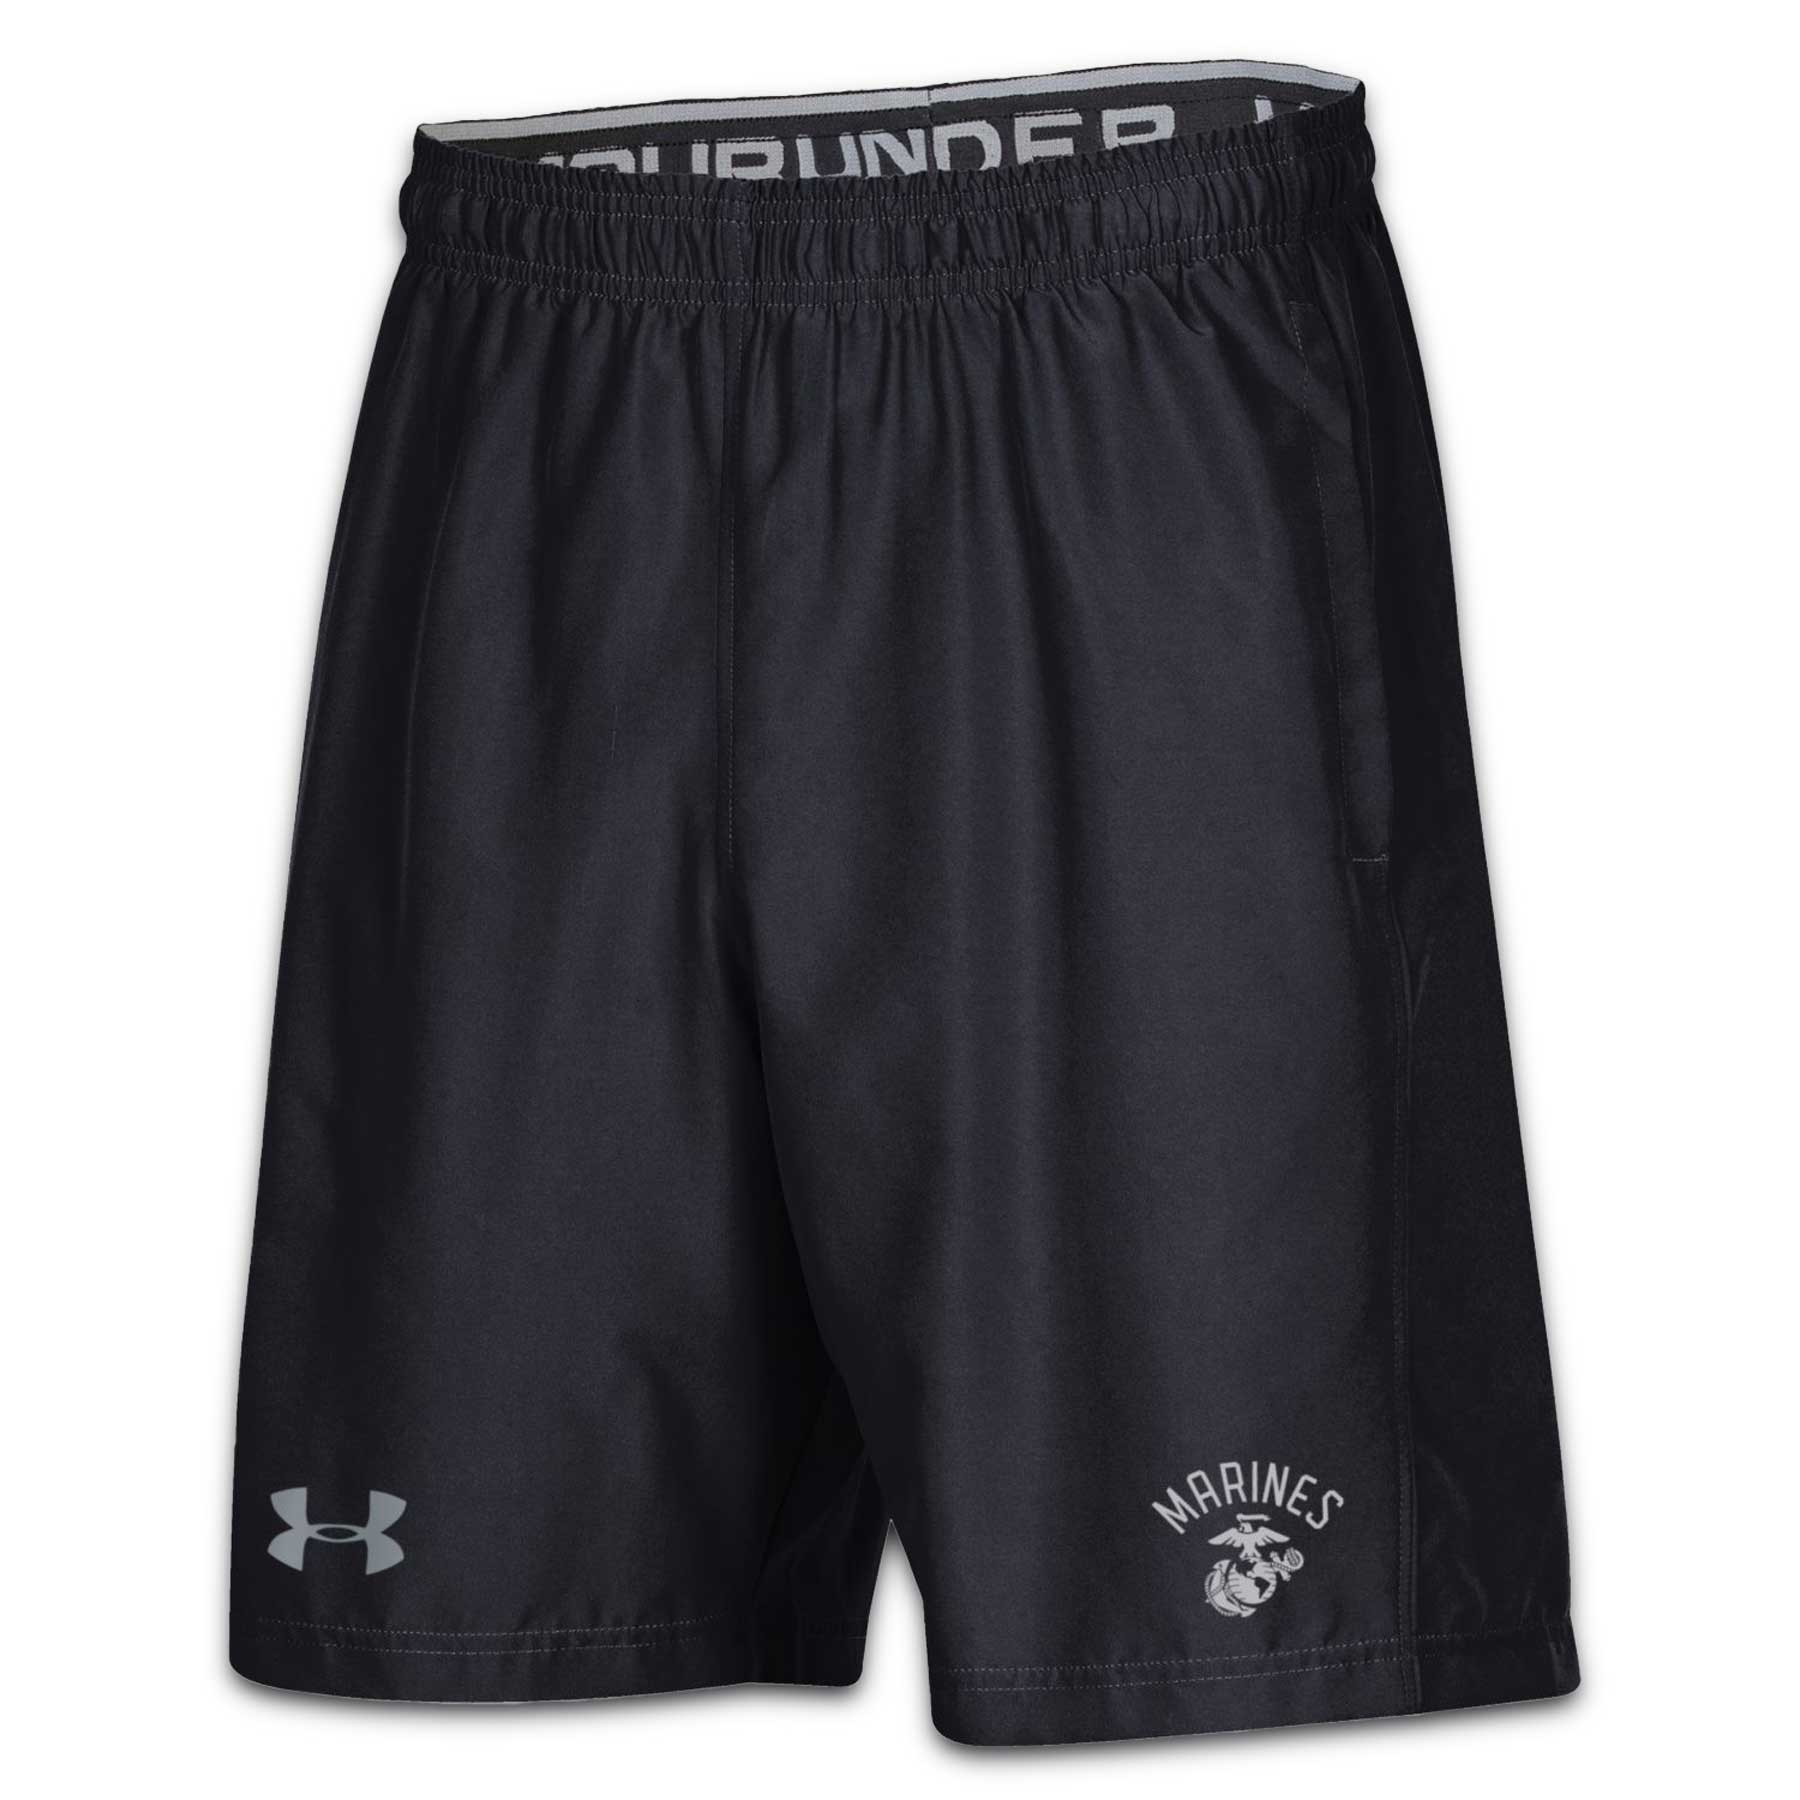 Image of Men's Under Armour Woven Shorts